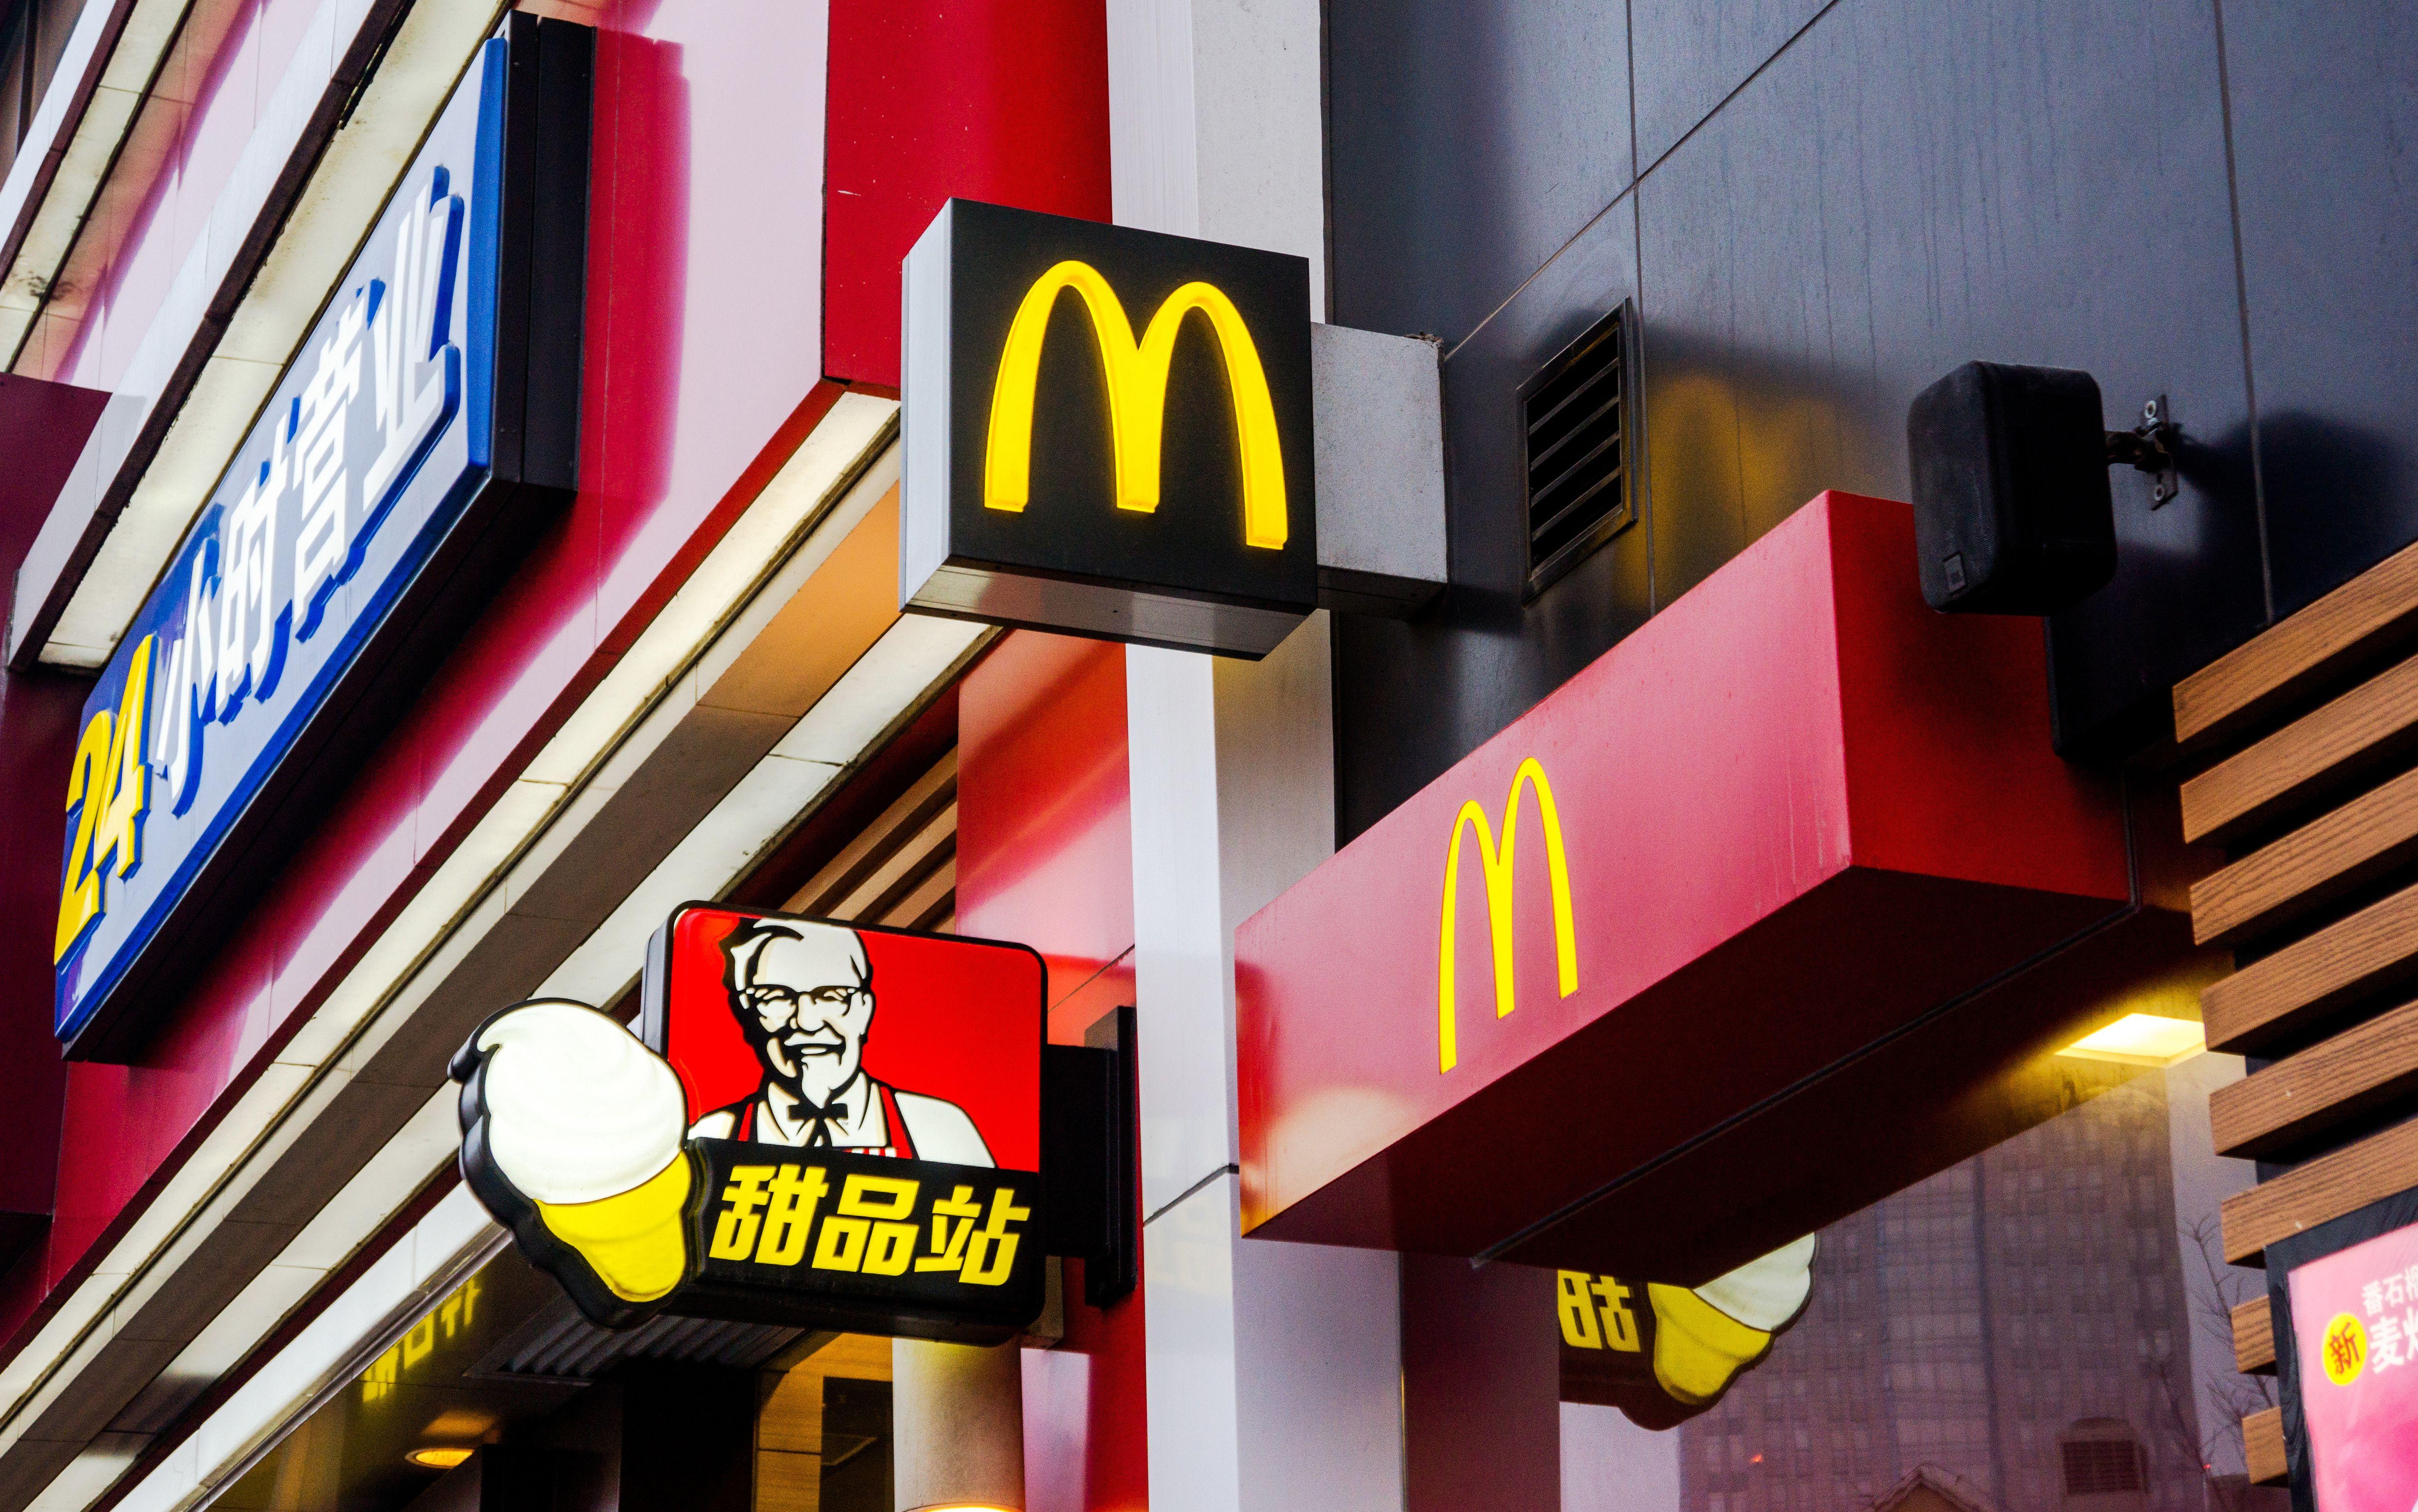 Chinese McDonald's Logo - China Food Scandal: Why Are Foreign Brands Coming Under Scrutiny? | Time